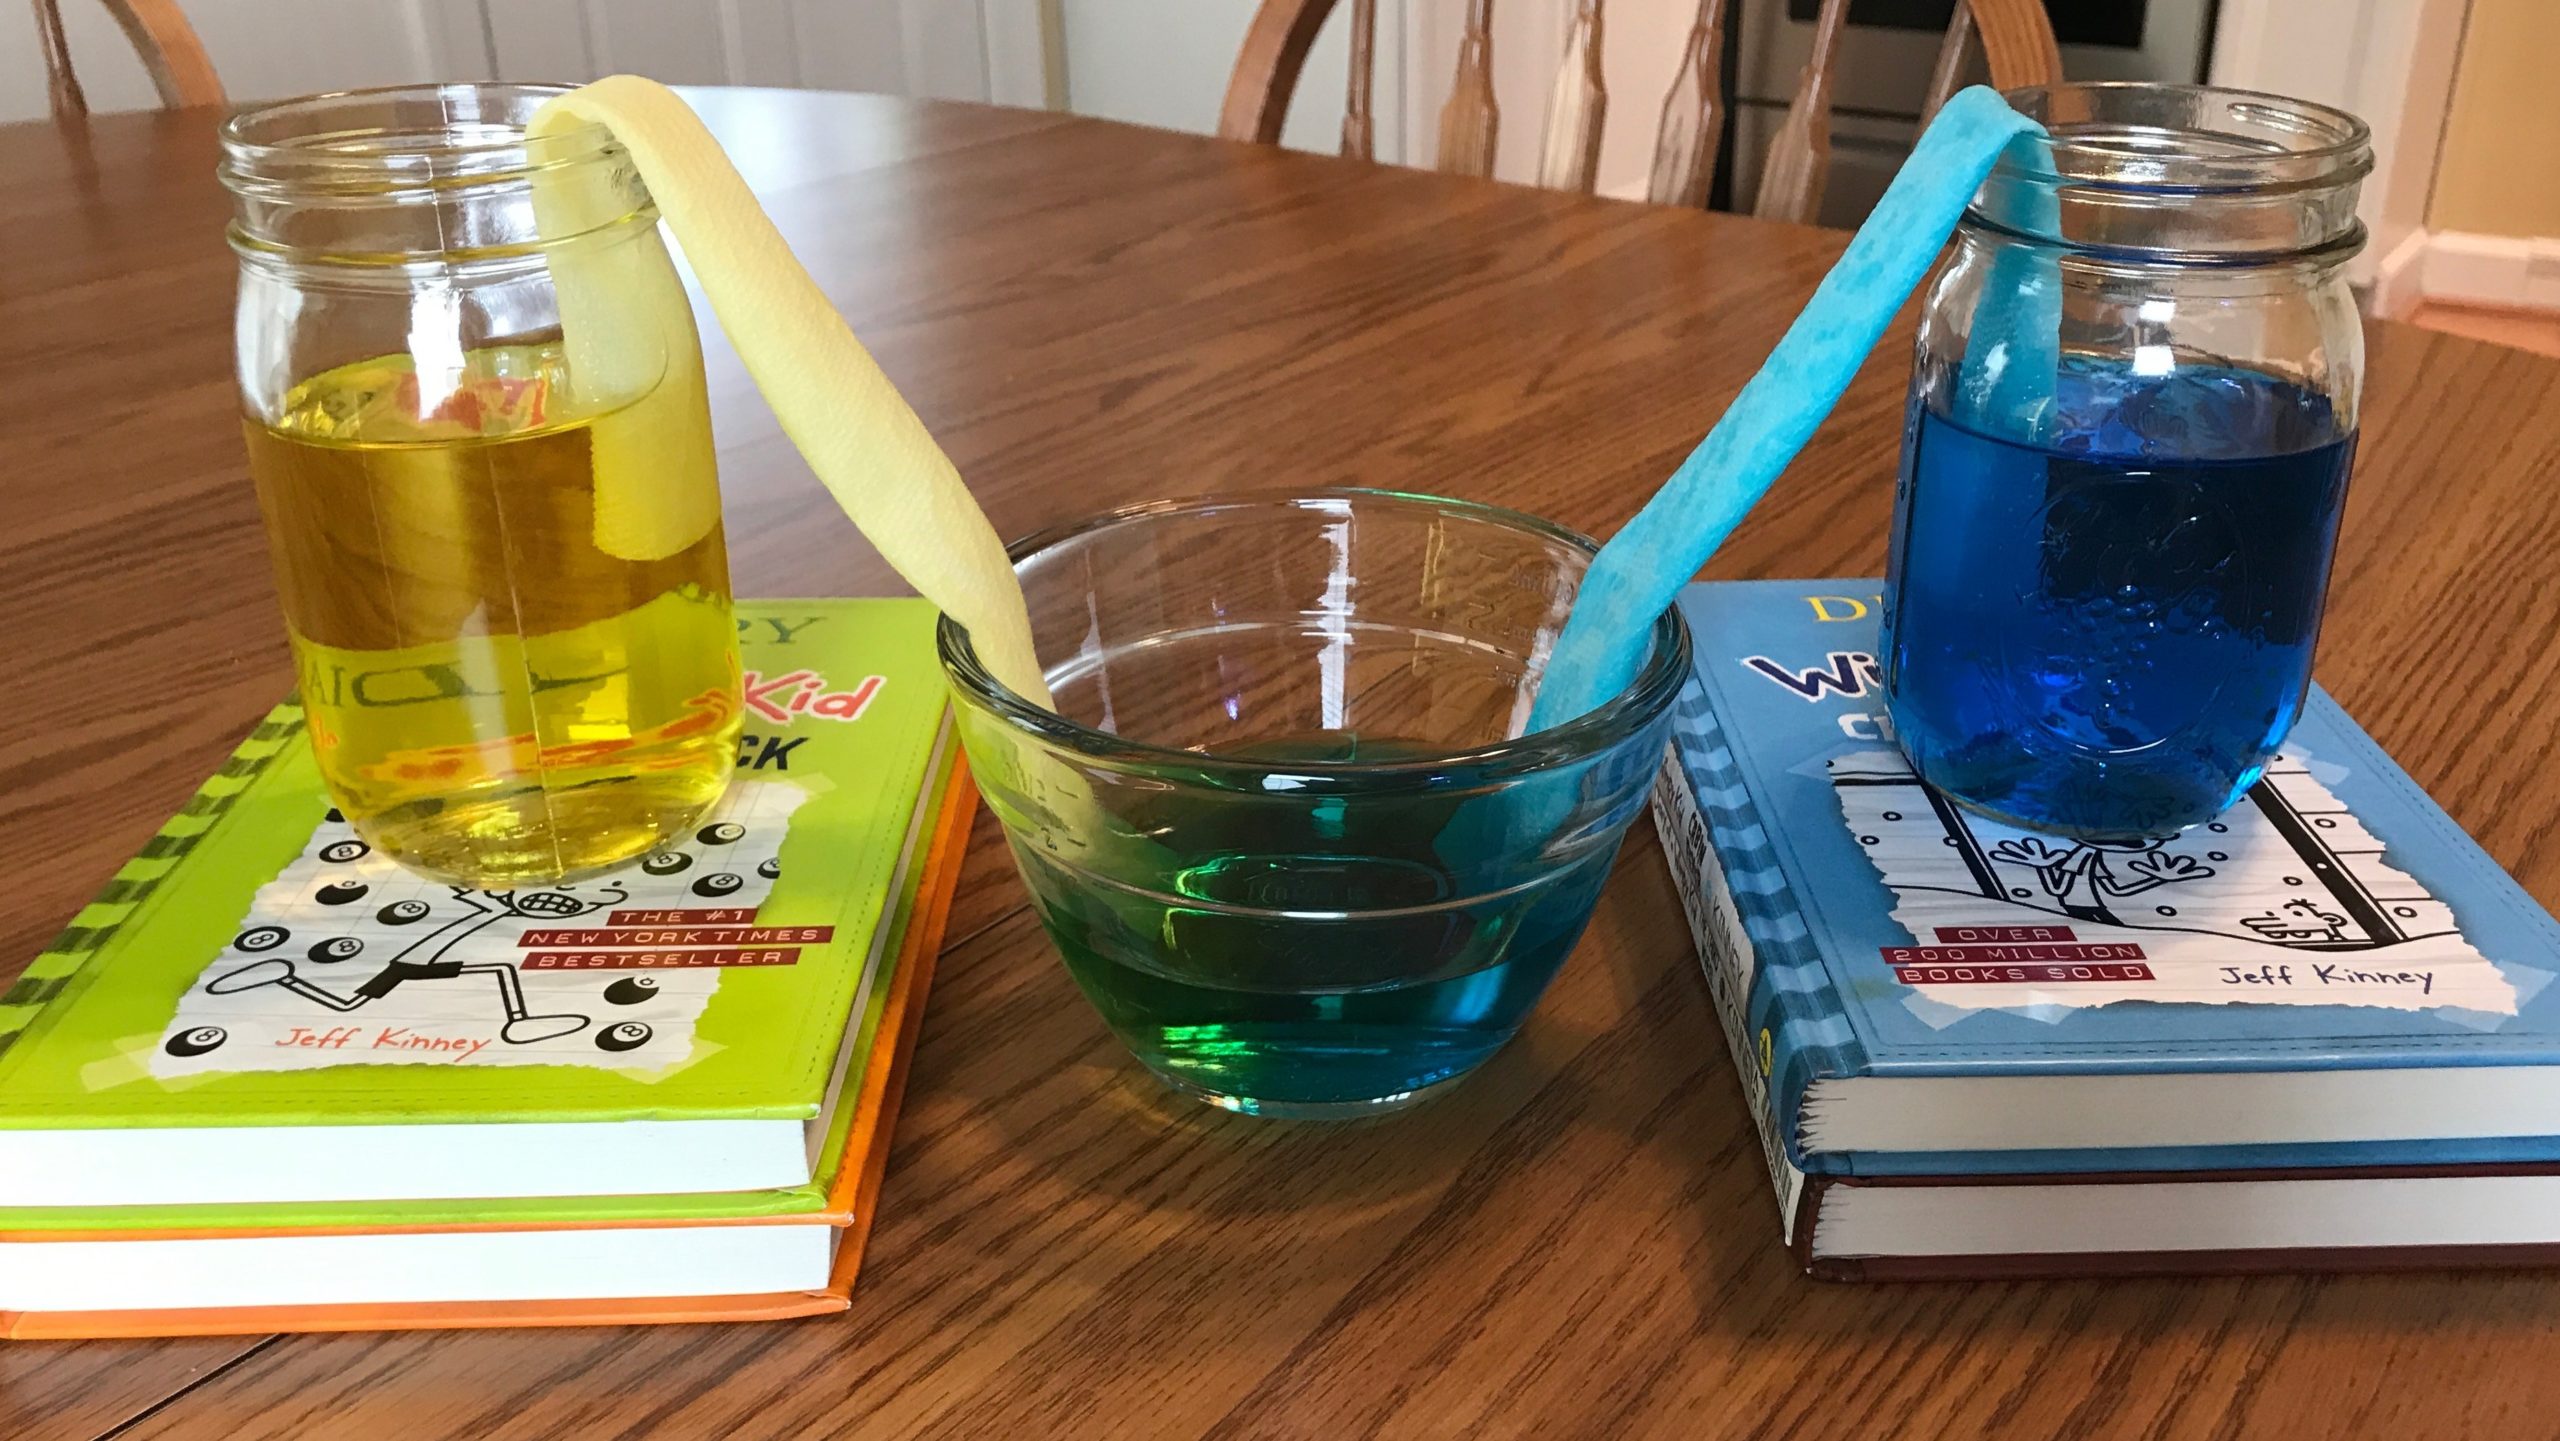 Try the ‘Walking Water’ Experiment With Your Kids